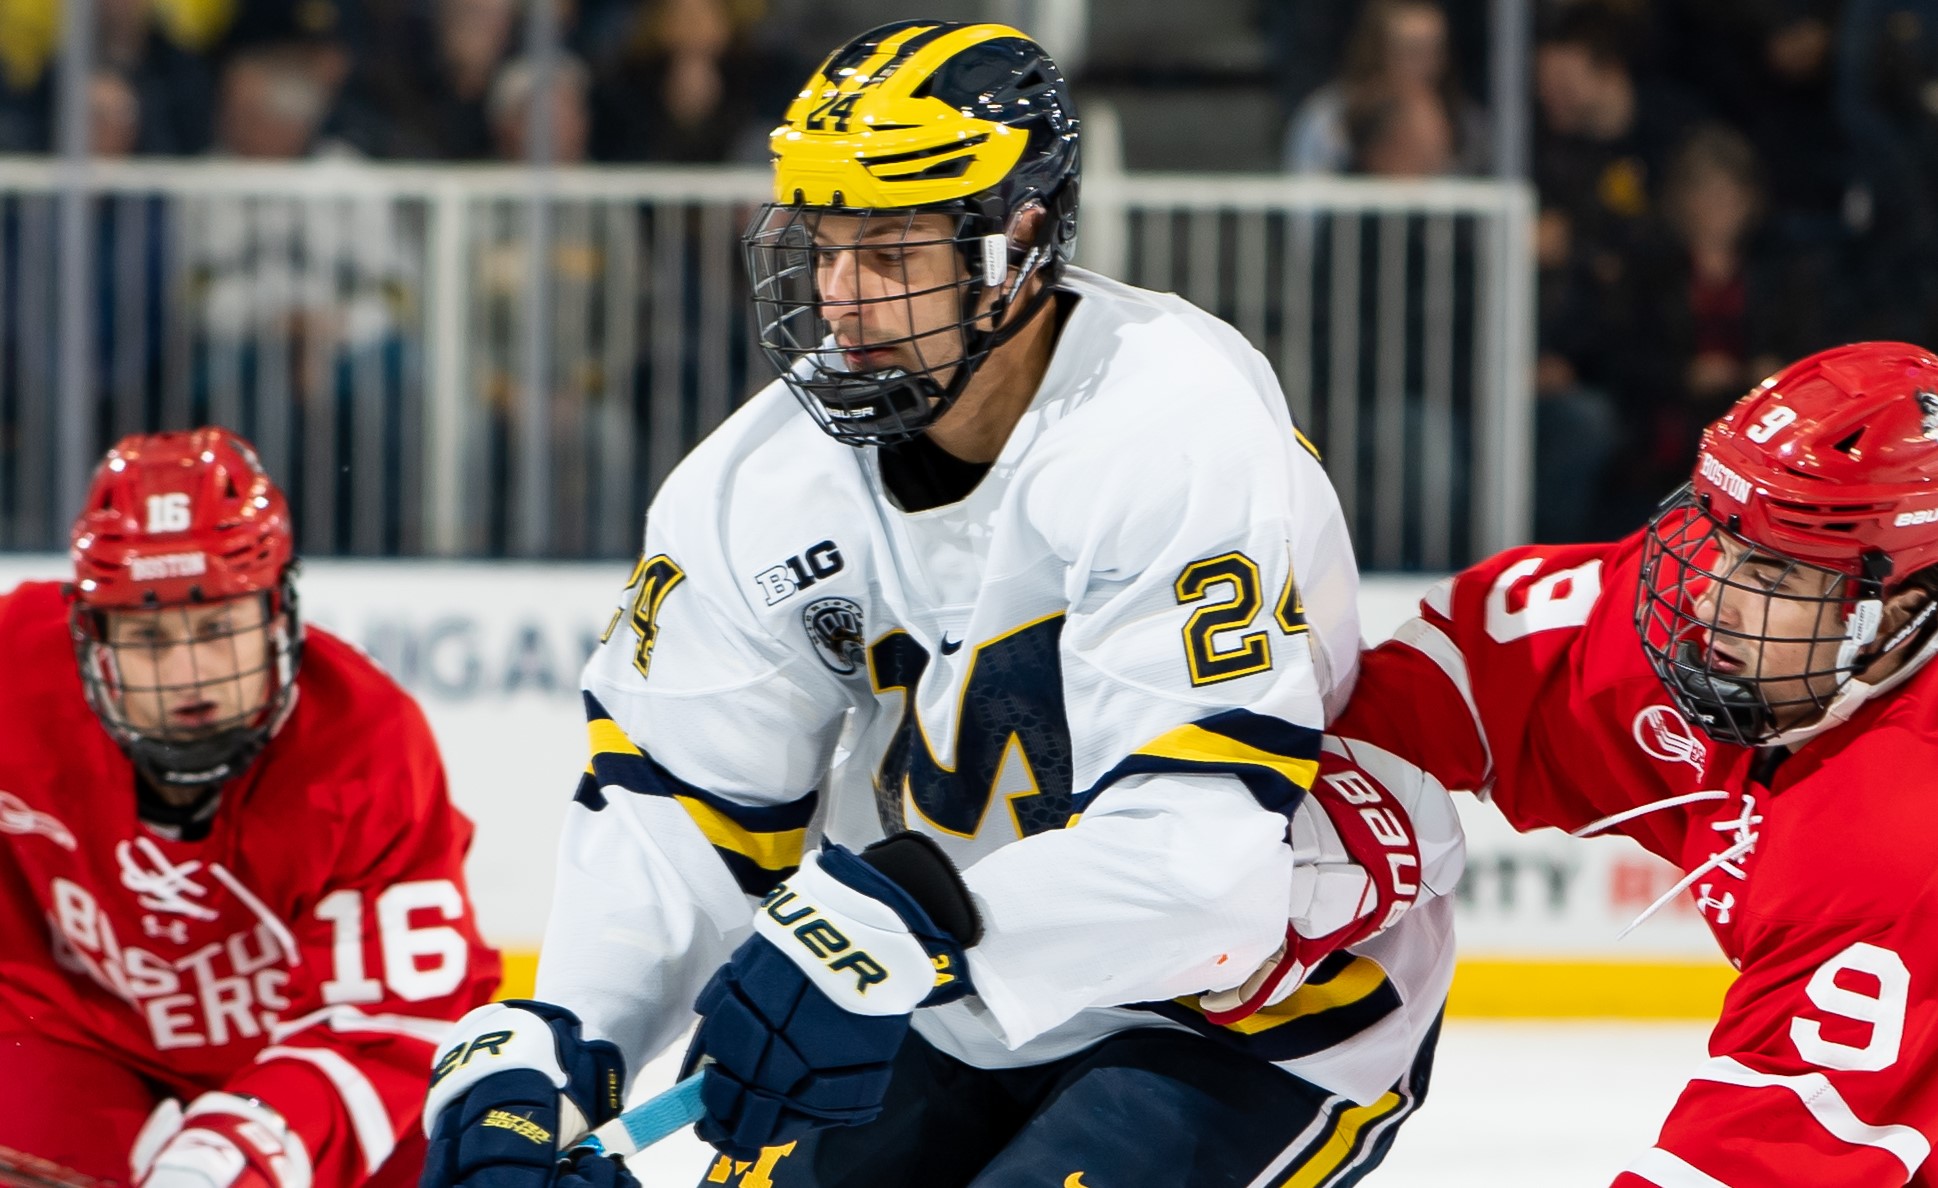 This Week in Big Ten Hockey Death scare now in rearview mirror, Michigans Holtz feeling pretty damned good, all things considered